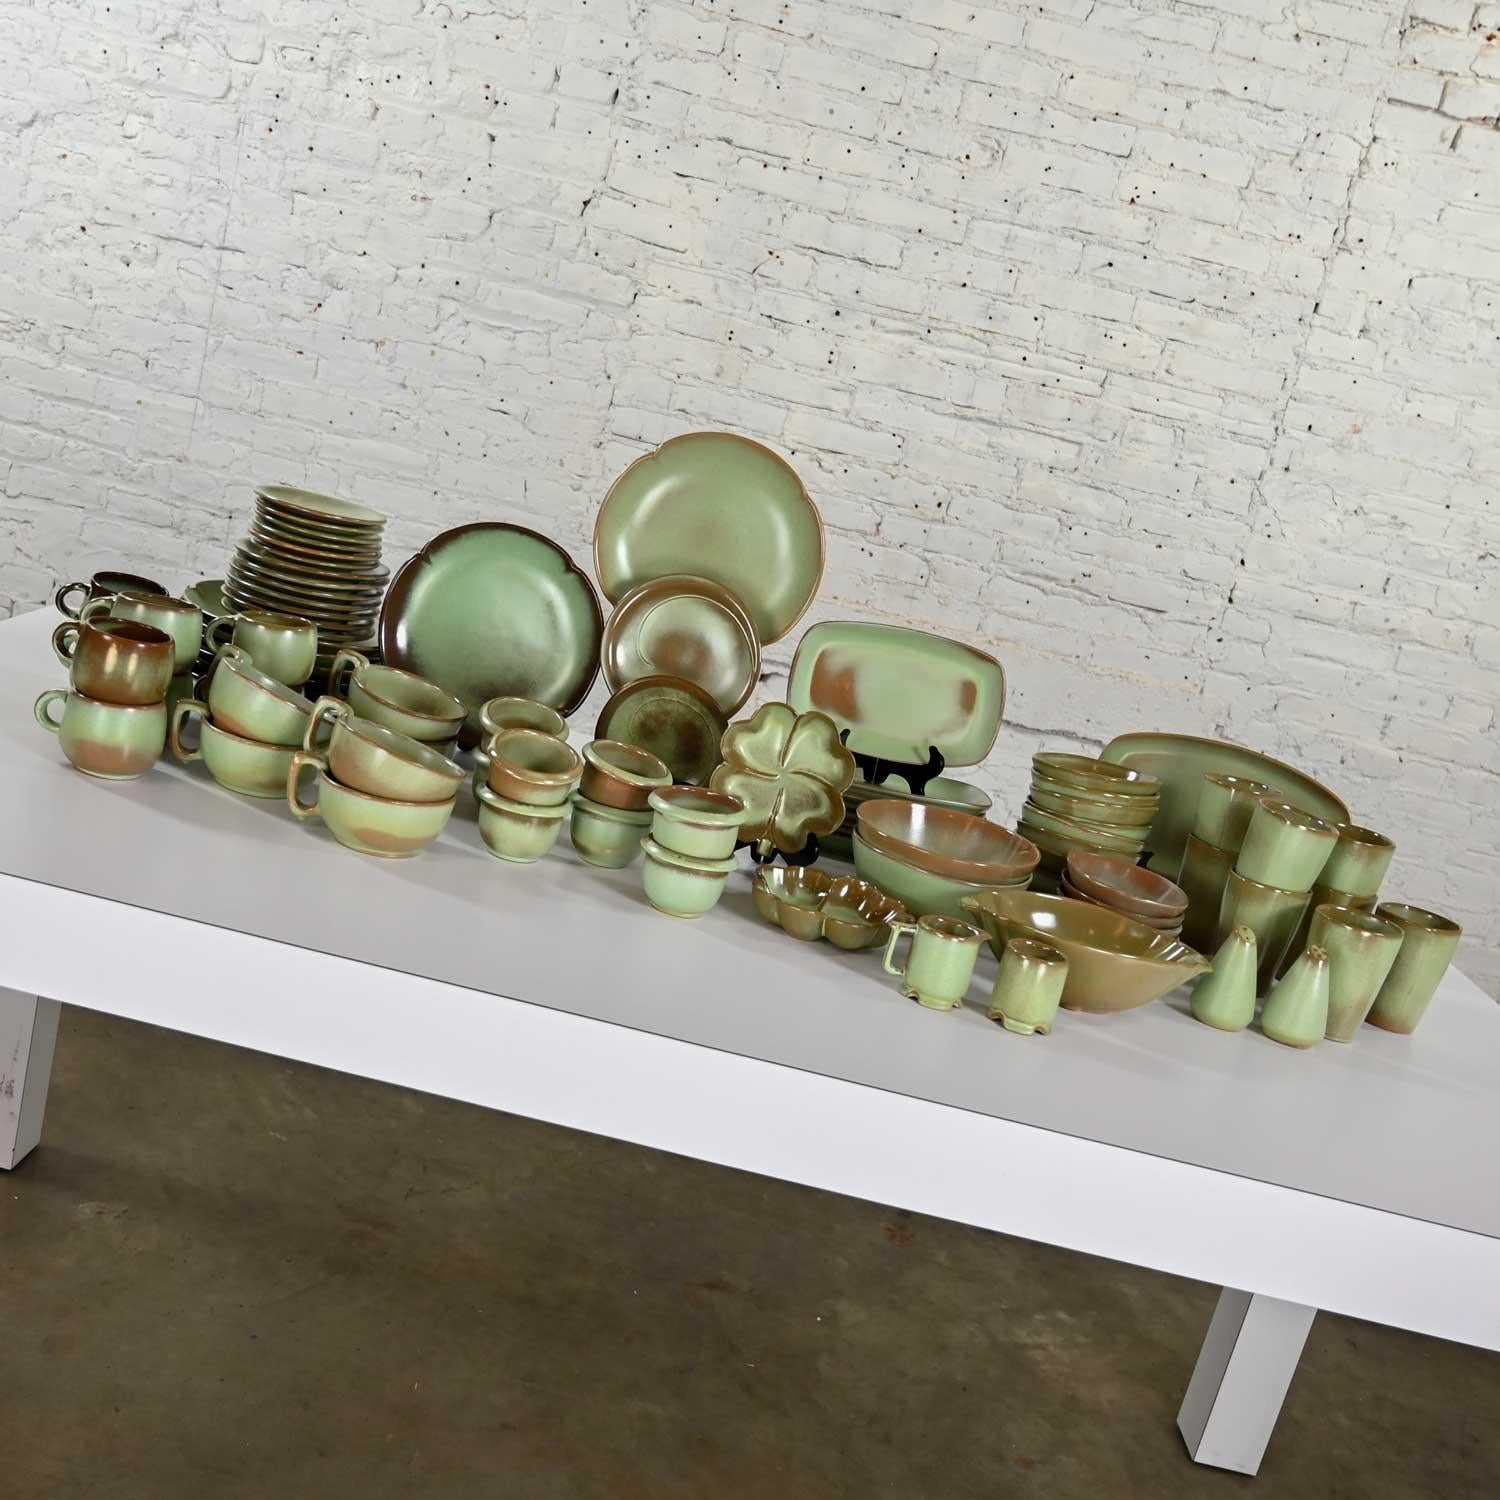 Outstanding vintage Frankoma 83-piece dinnerware set in patterns of Plainsman, Lazybones, & Westwinds with green & prairie green two-tone glaze. Gorgeous condition, keeping in mind that these are vintage and not new so will have signs of use and